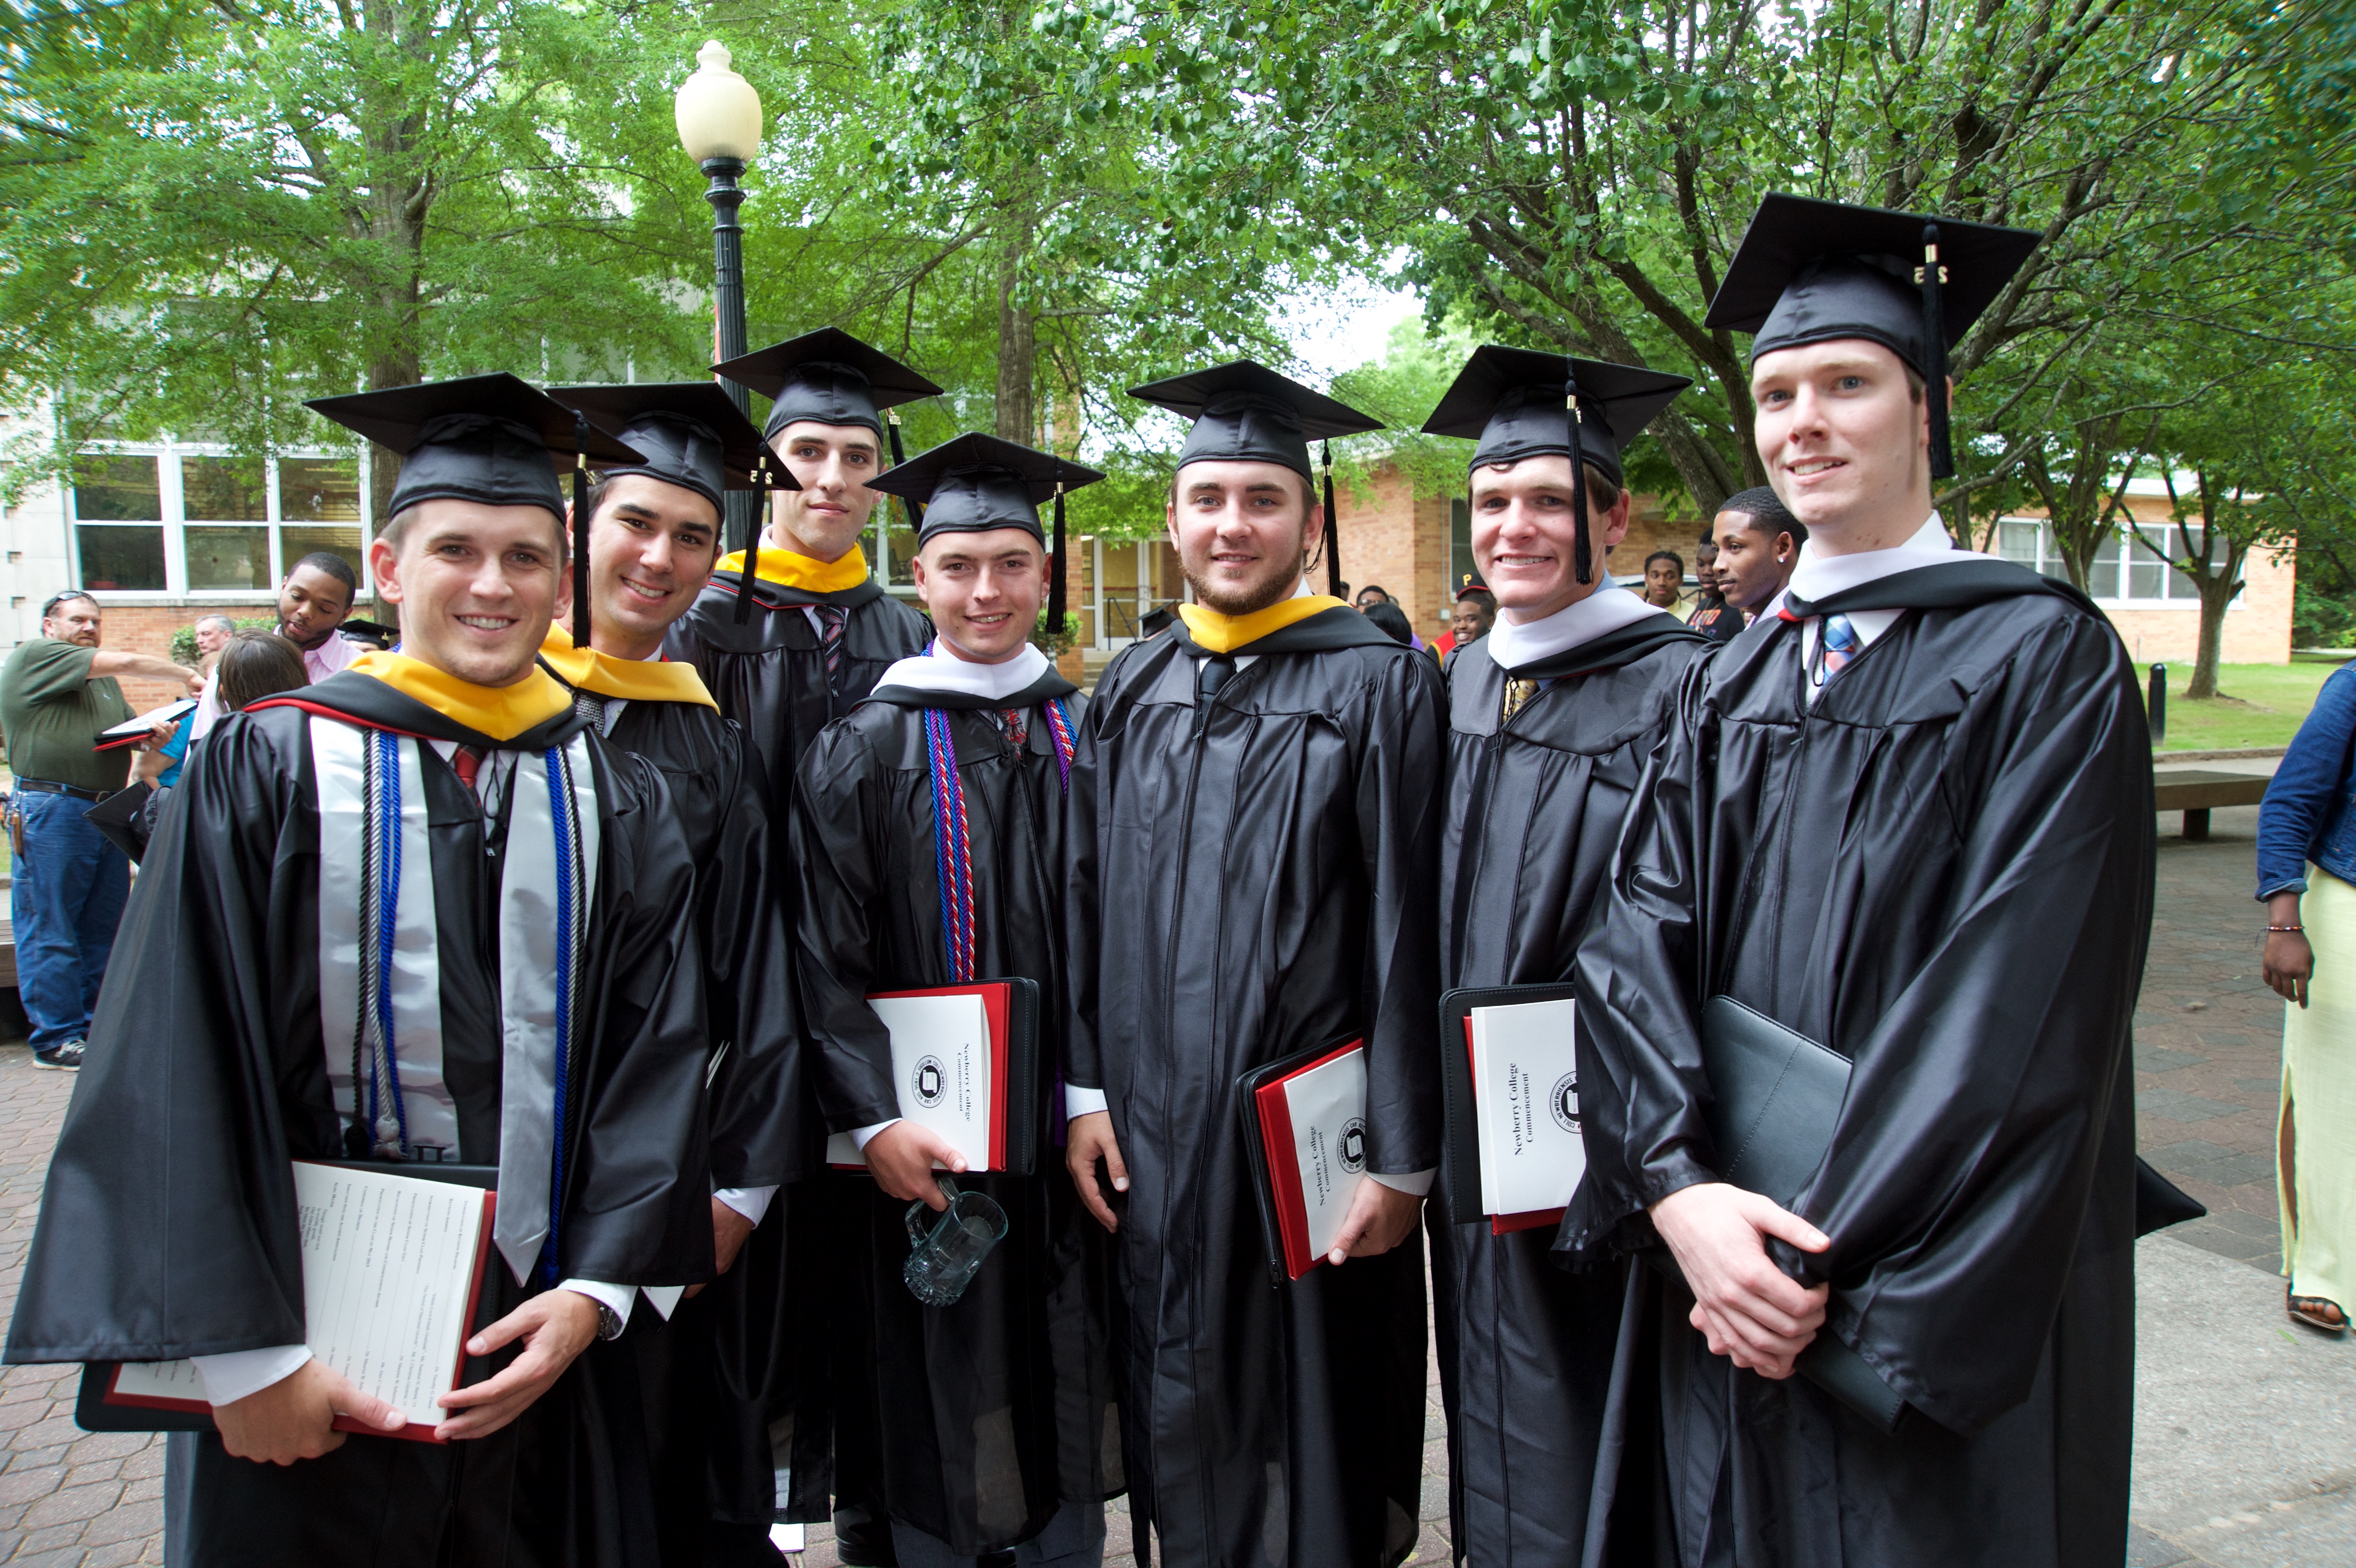 Seven graduates in cap and gown